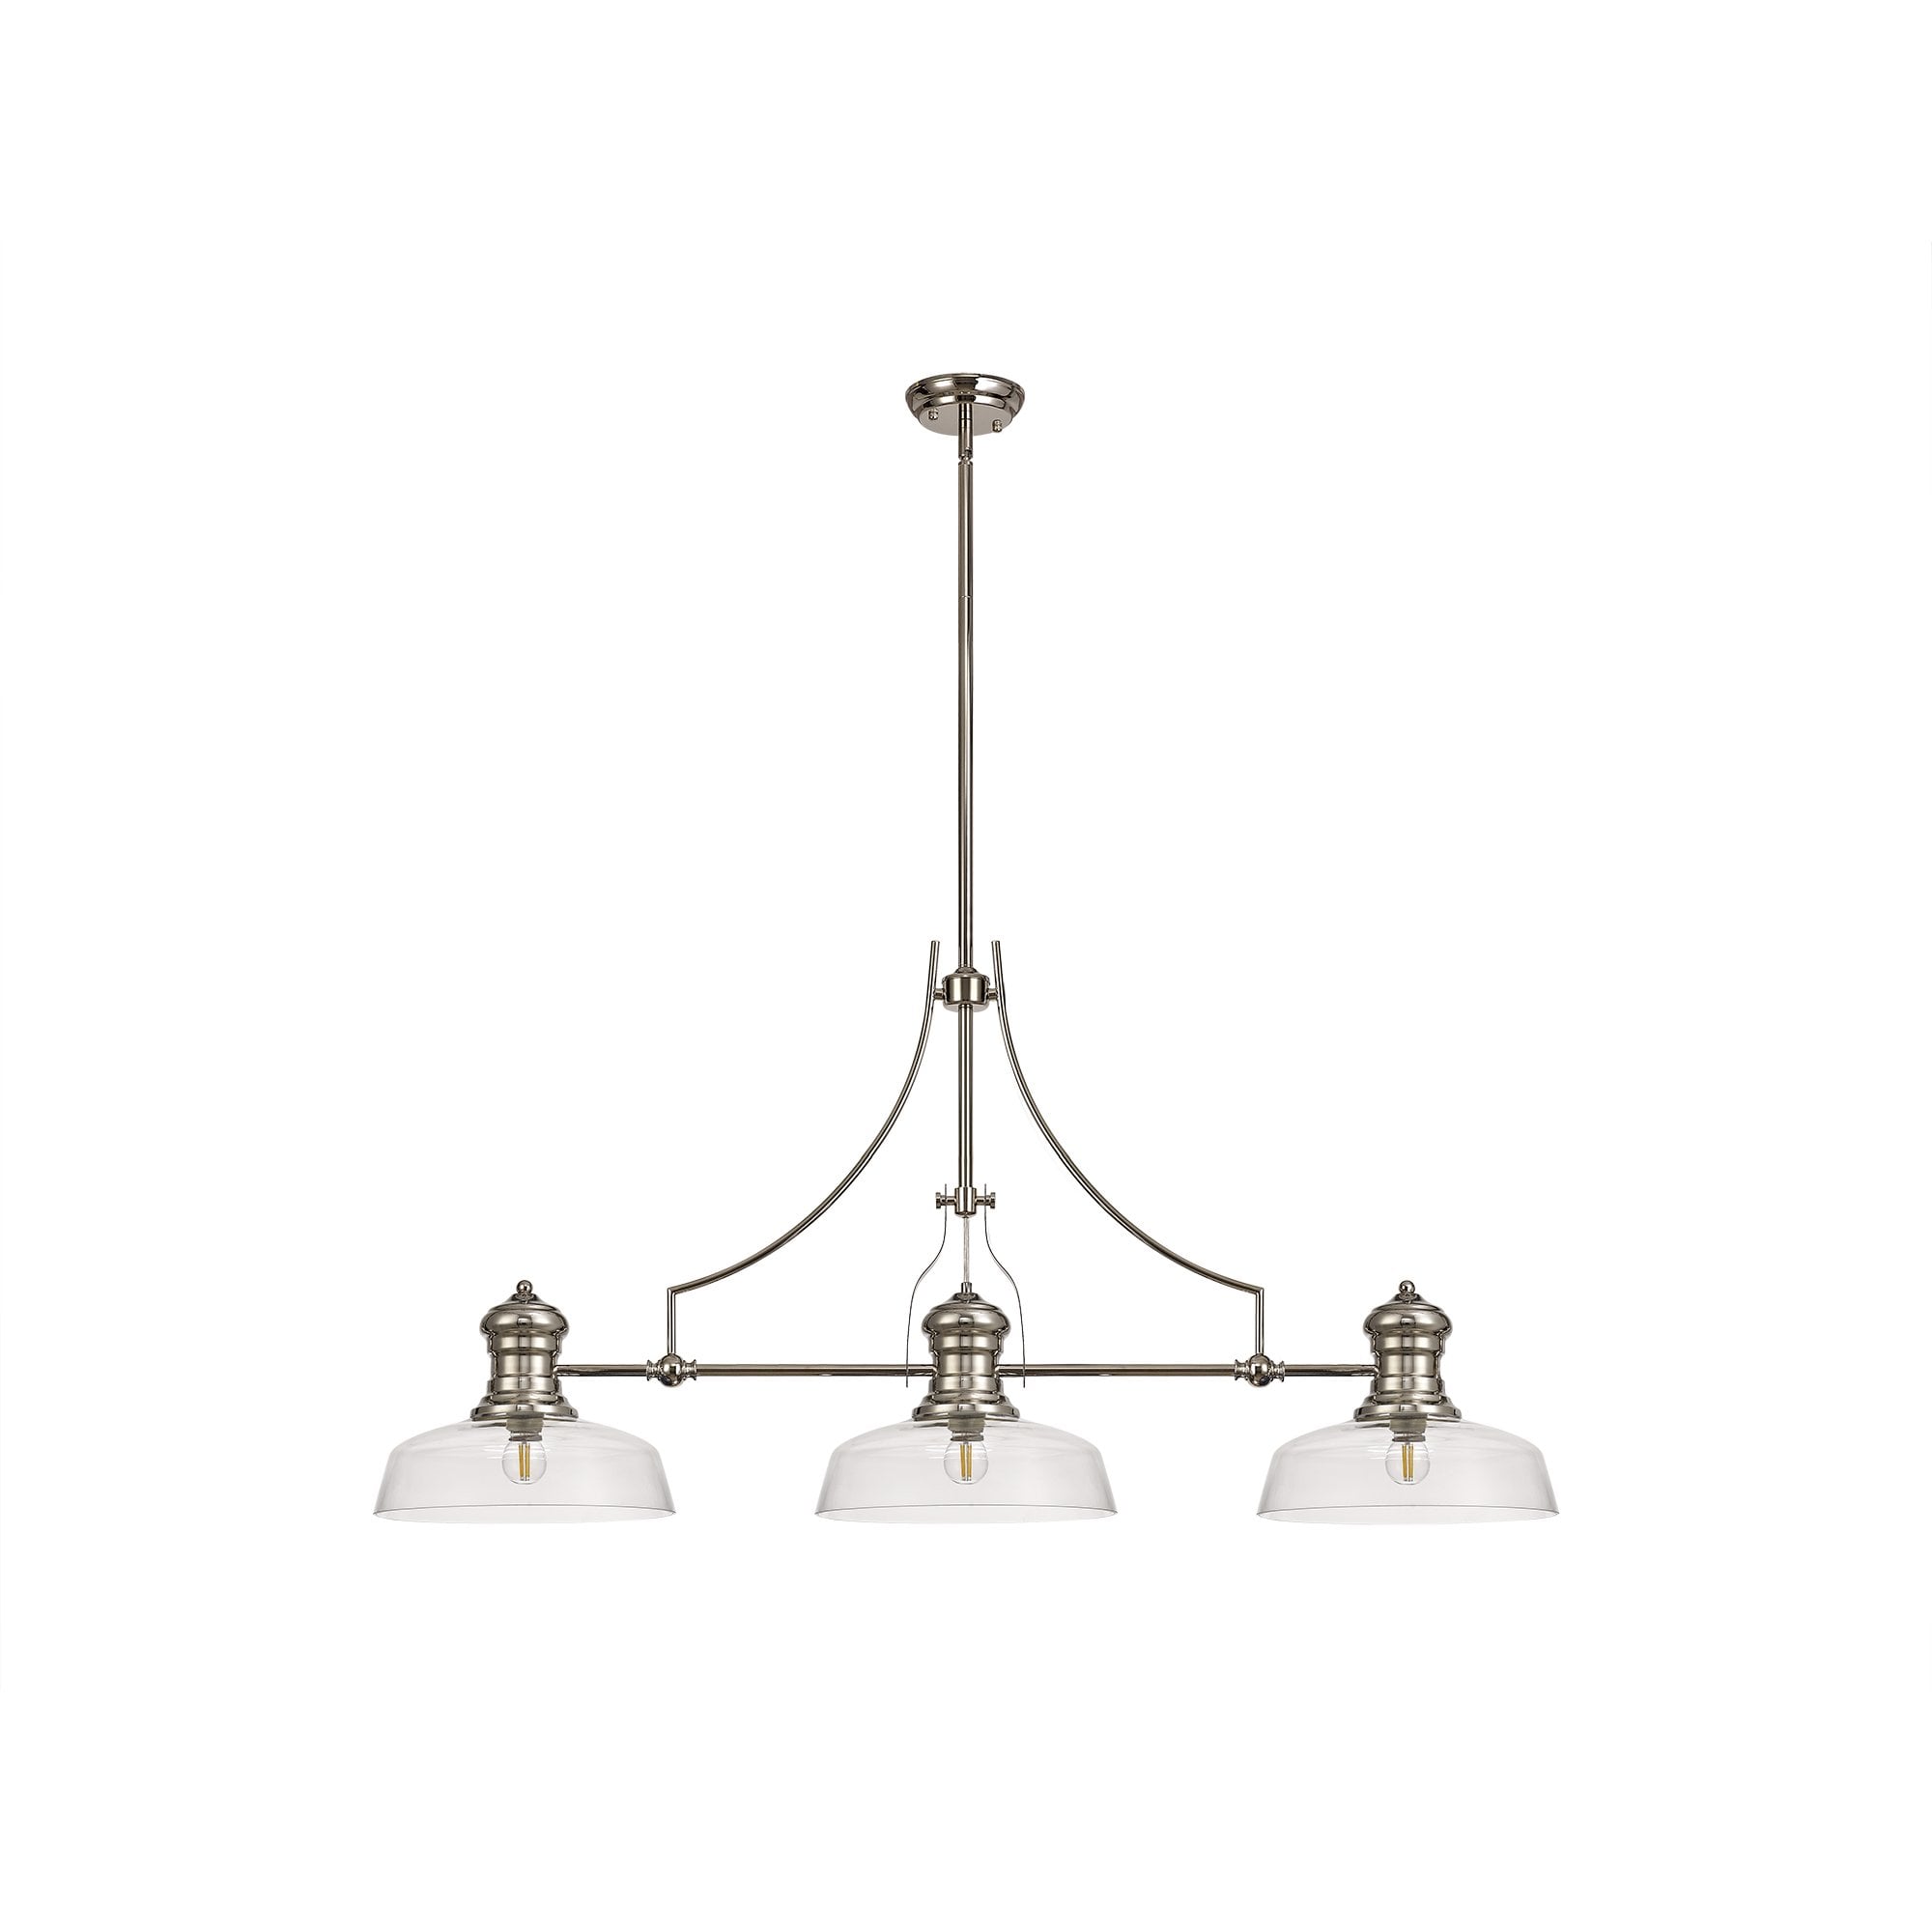 3 Light Telescopic Pendant E27 With 30cm Flat Round Glass Shade, Polished Nickel/Clear